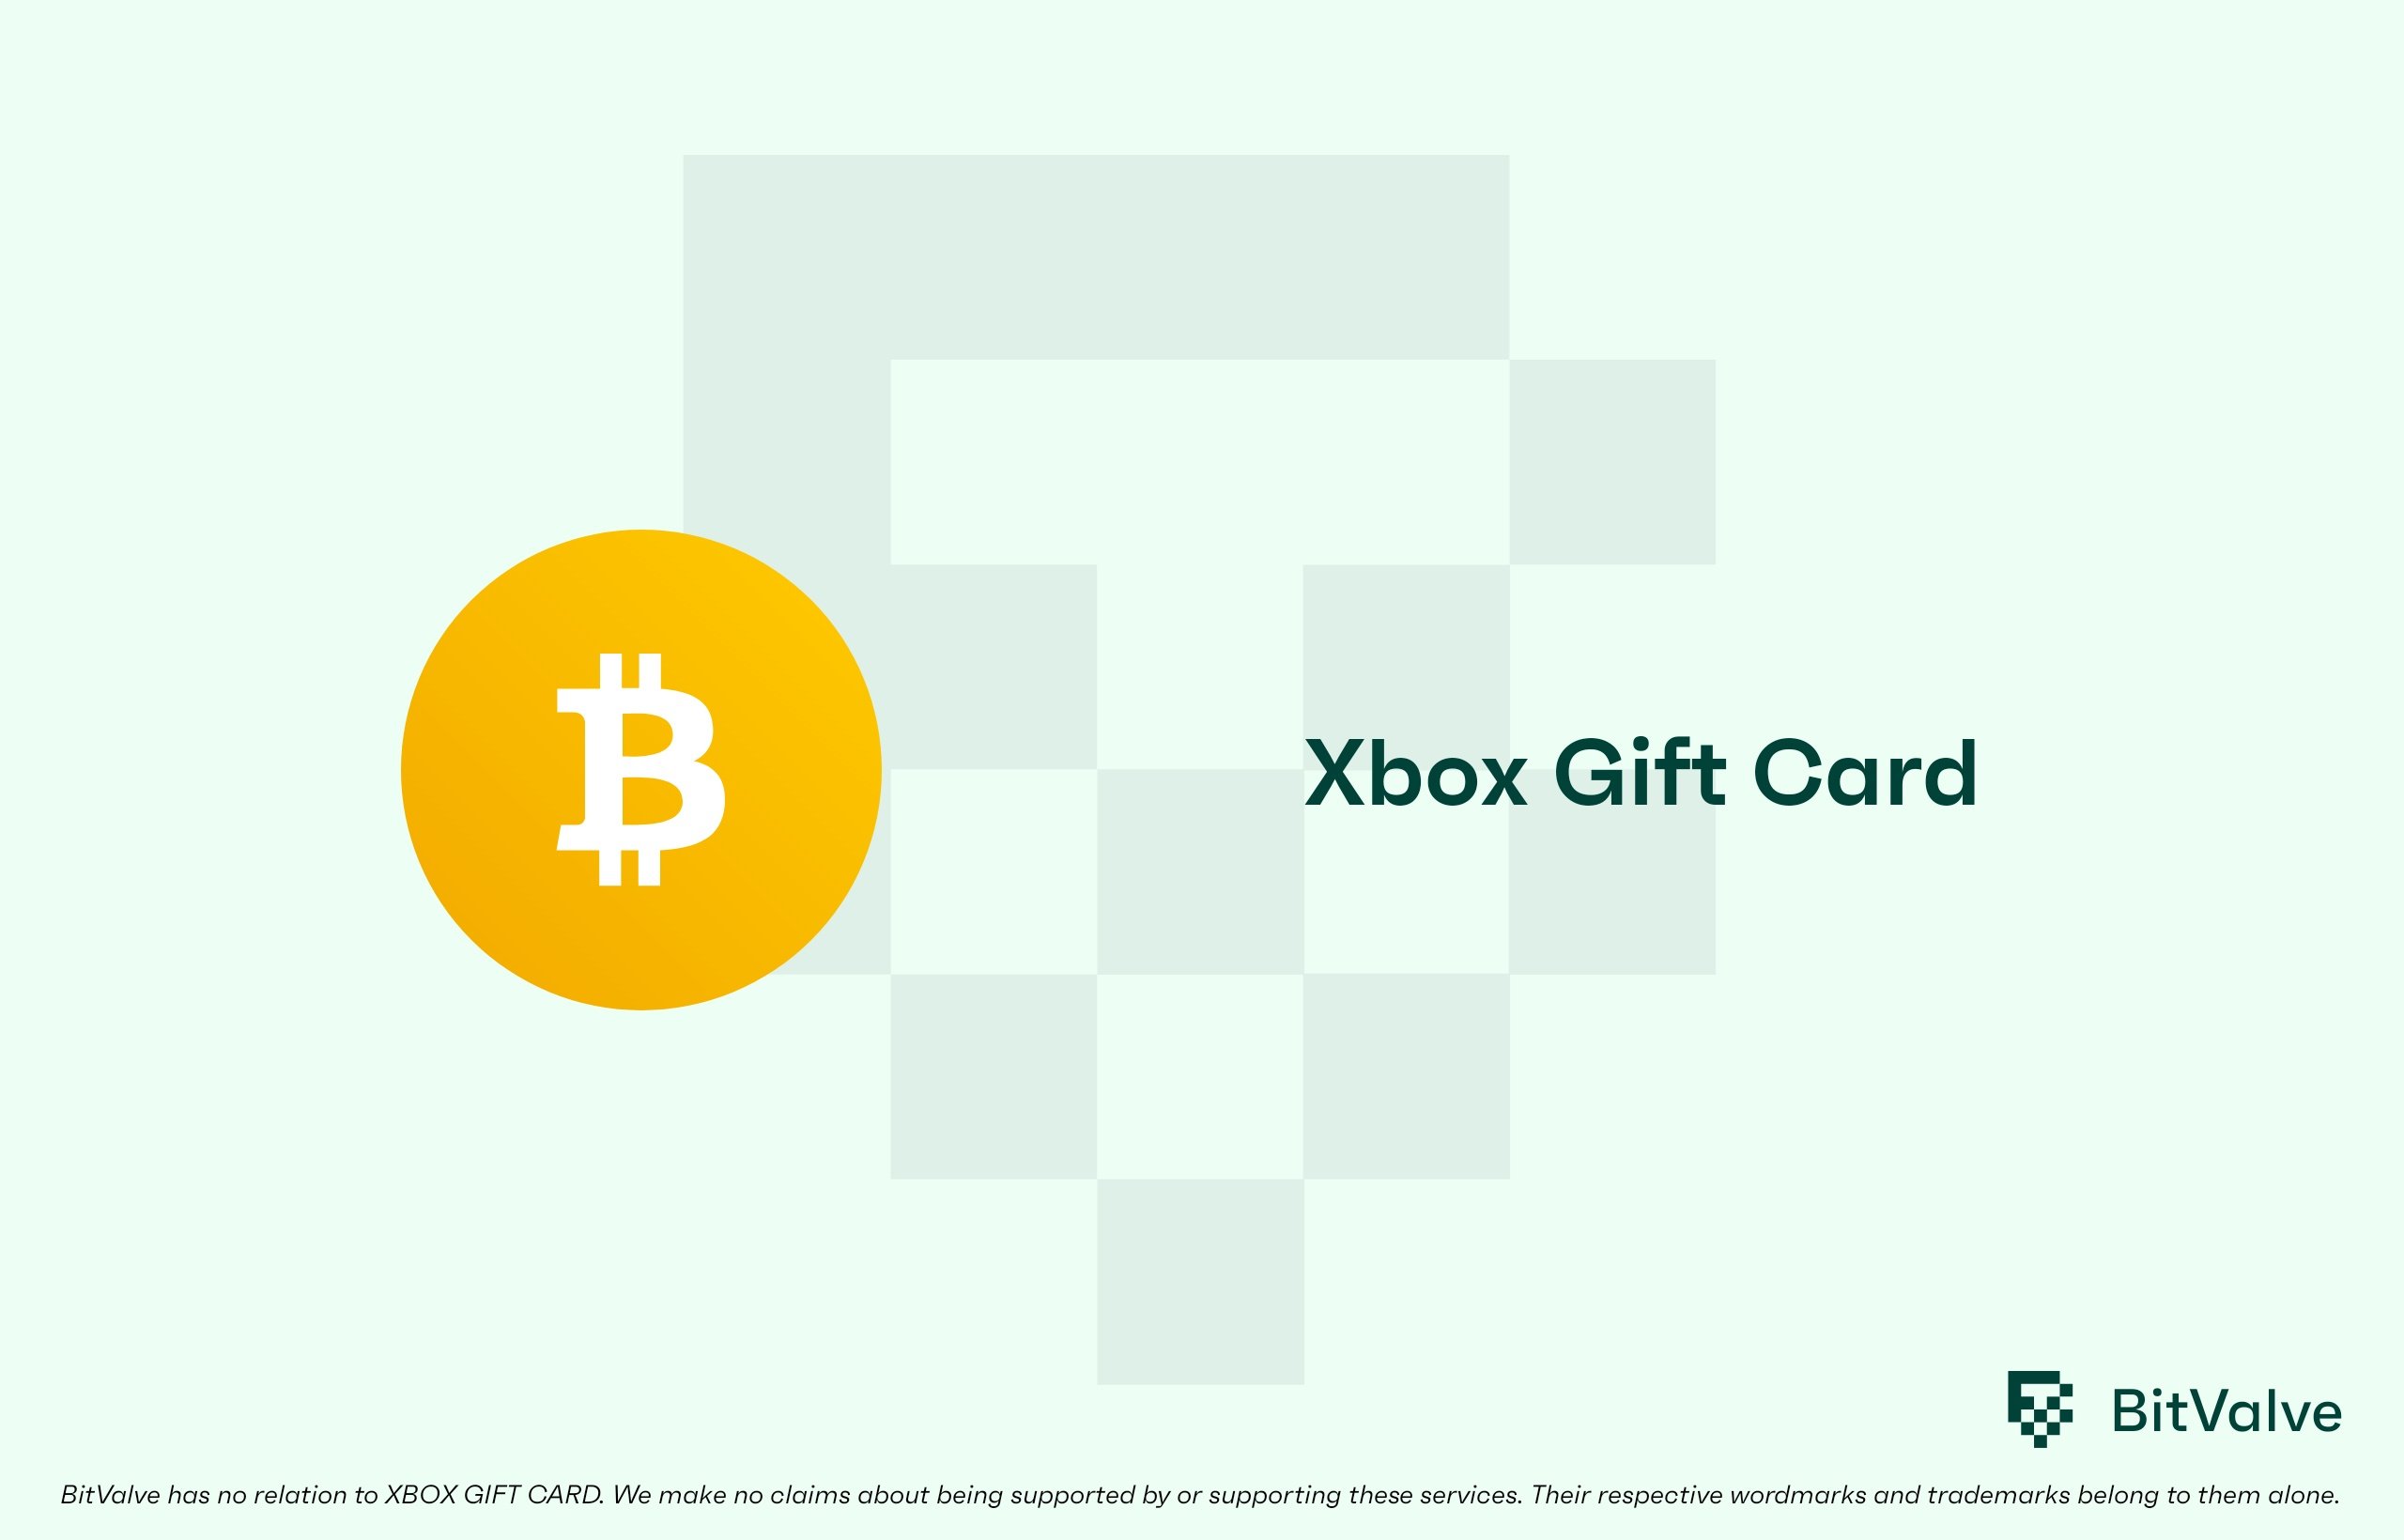 Buy Xbox Game Pass Core Gift Card with Bitcoin, ETH or Crypto - Bitrefill